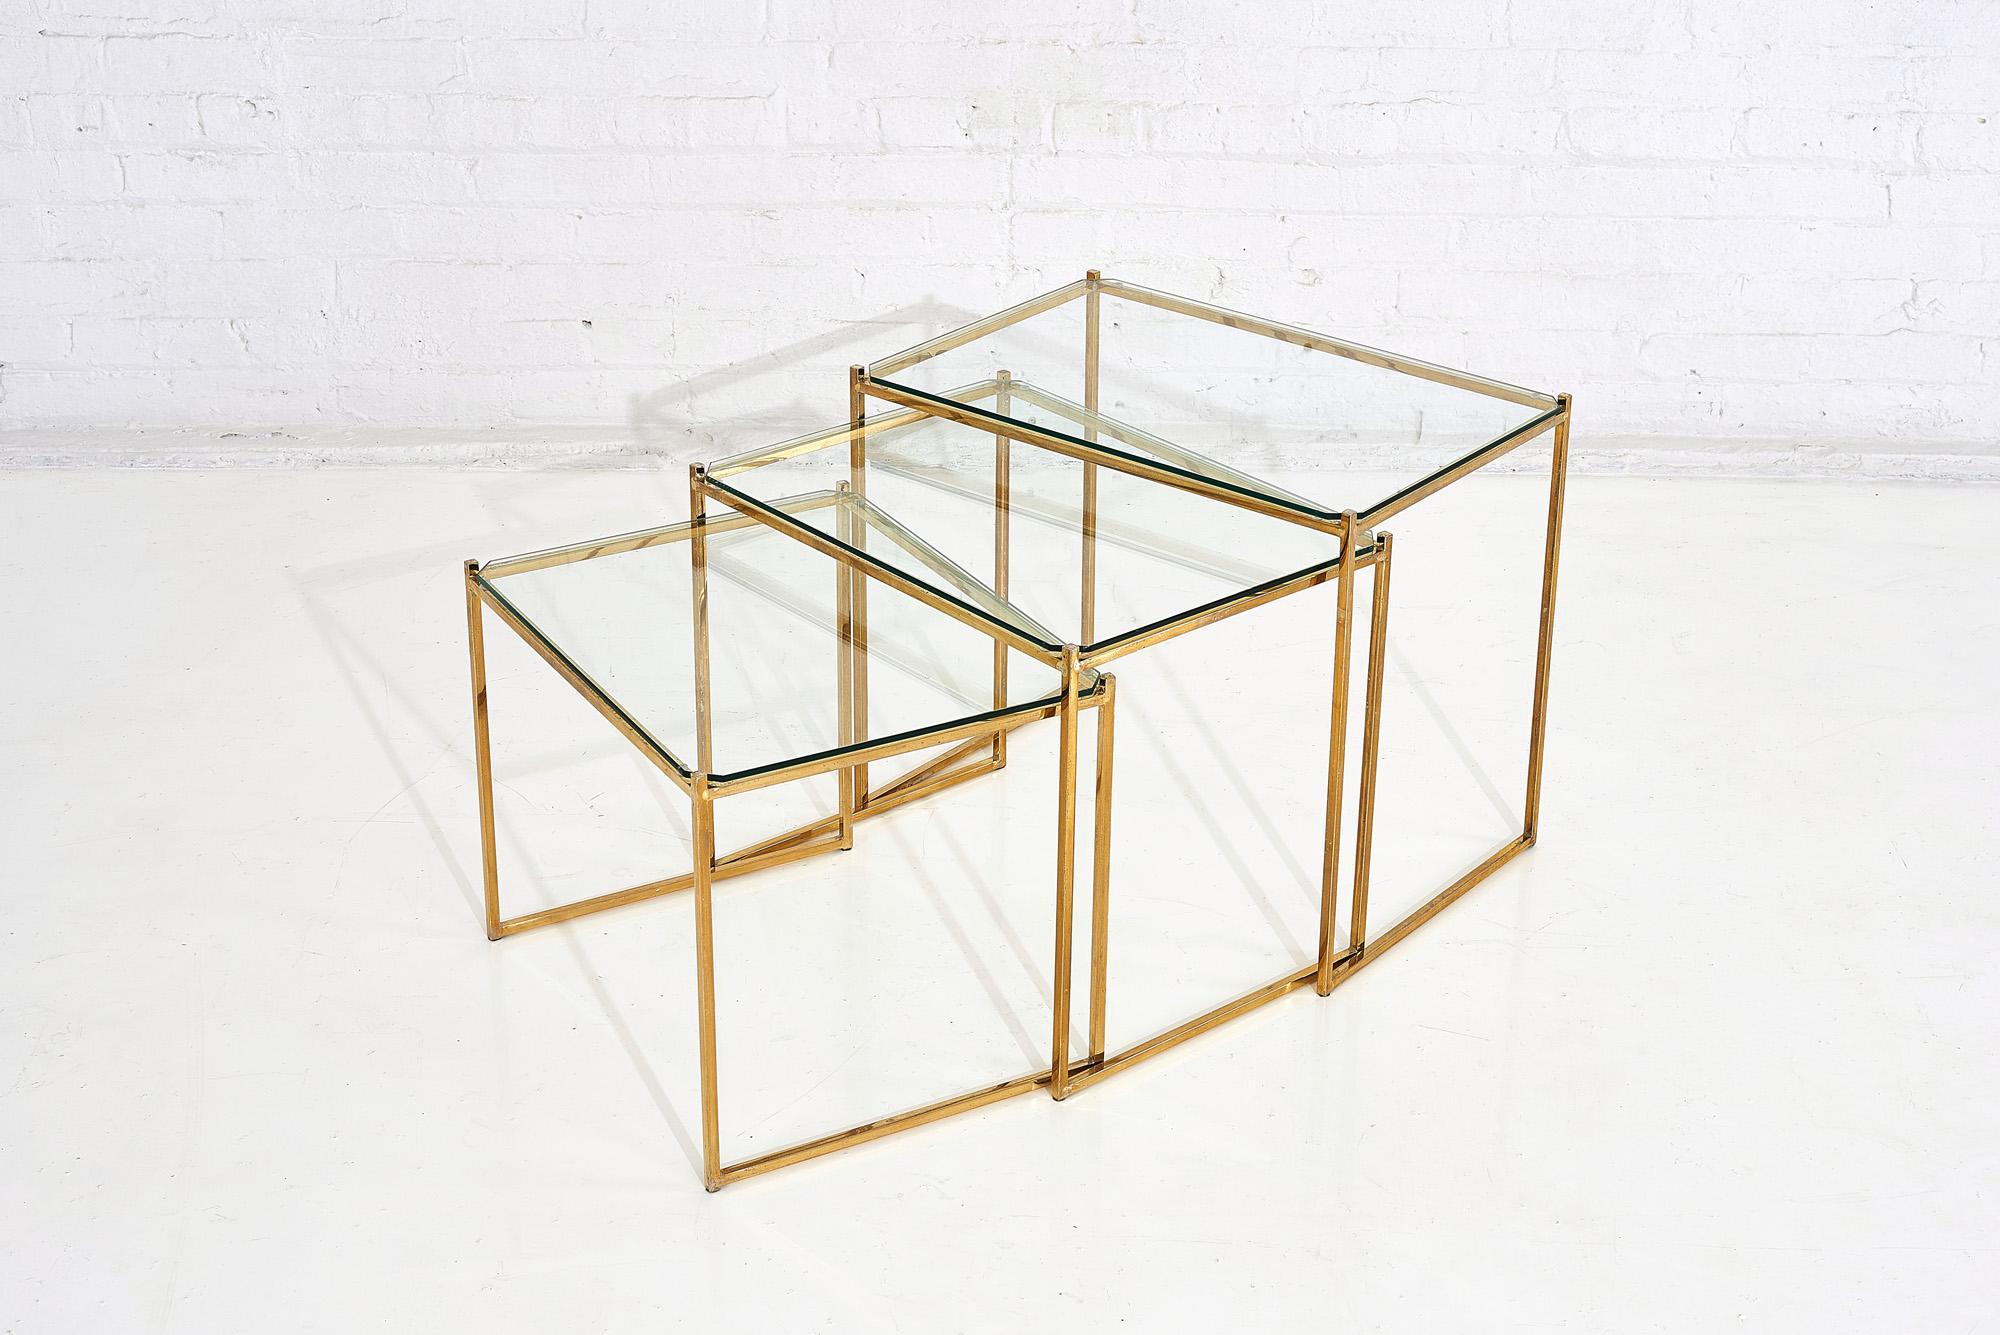 Brass and glass nesting tables by Guy Lefevre for Maison Jansen, 1970’s. Set tables were designed by Guy Lefevre during the 1970’s, for Maison Jansen in France.